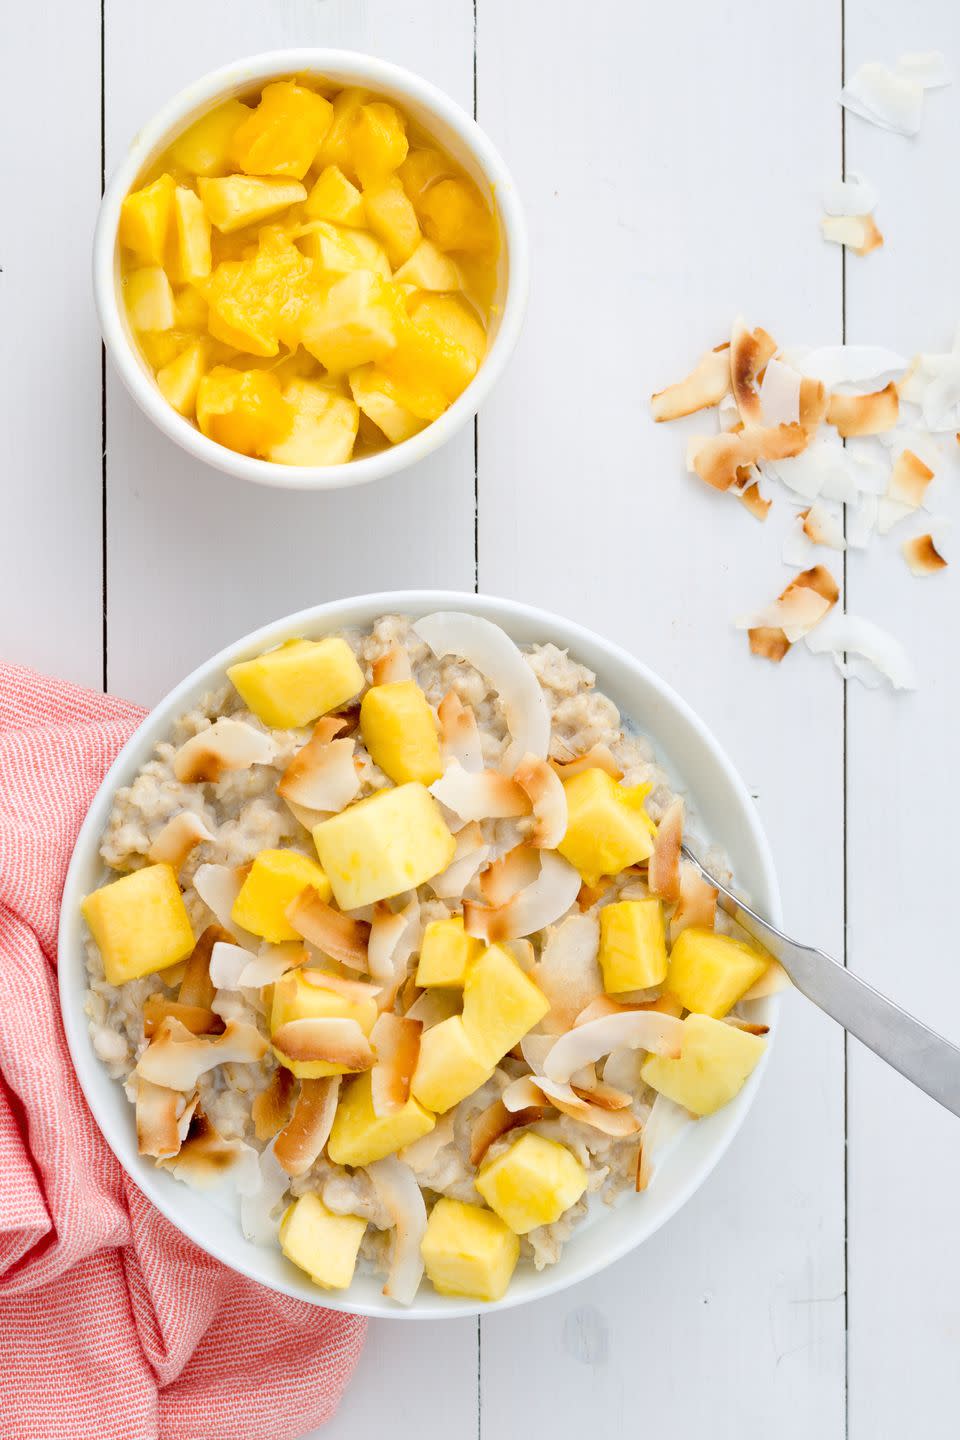 Tropical Oatmeal with Coconut and Mango